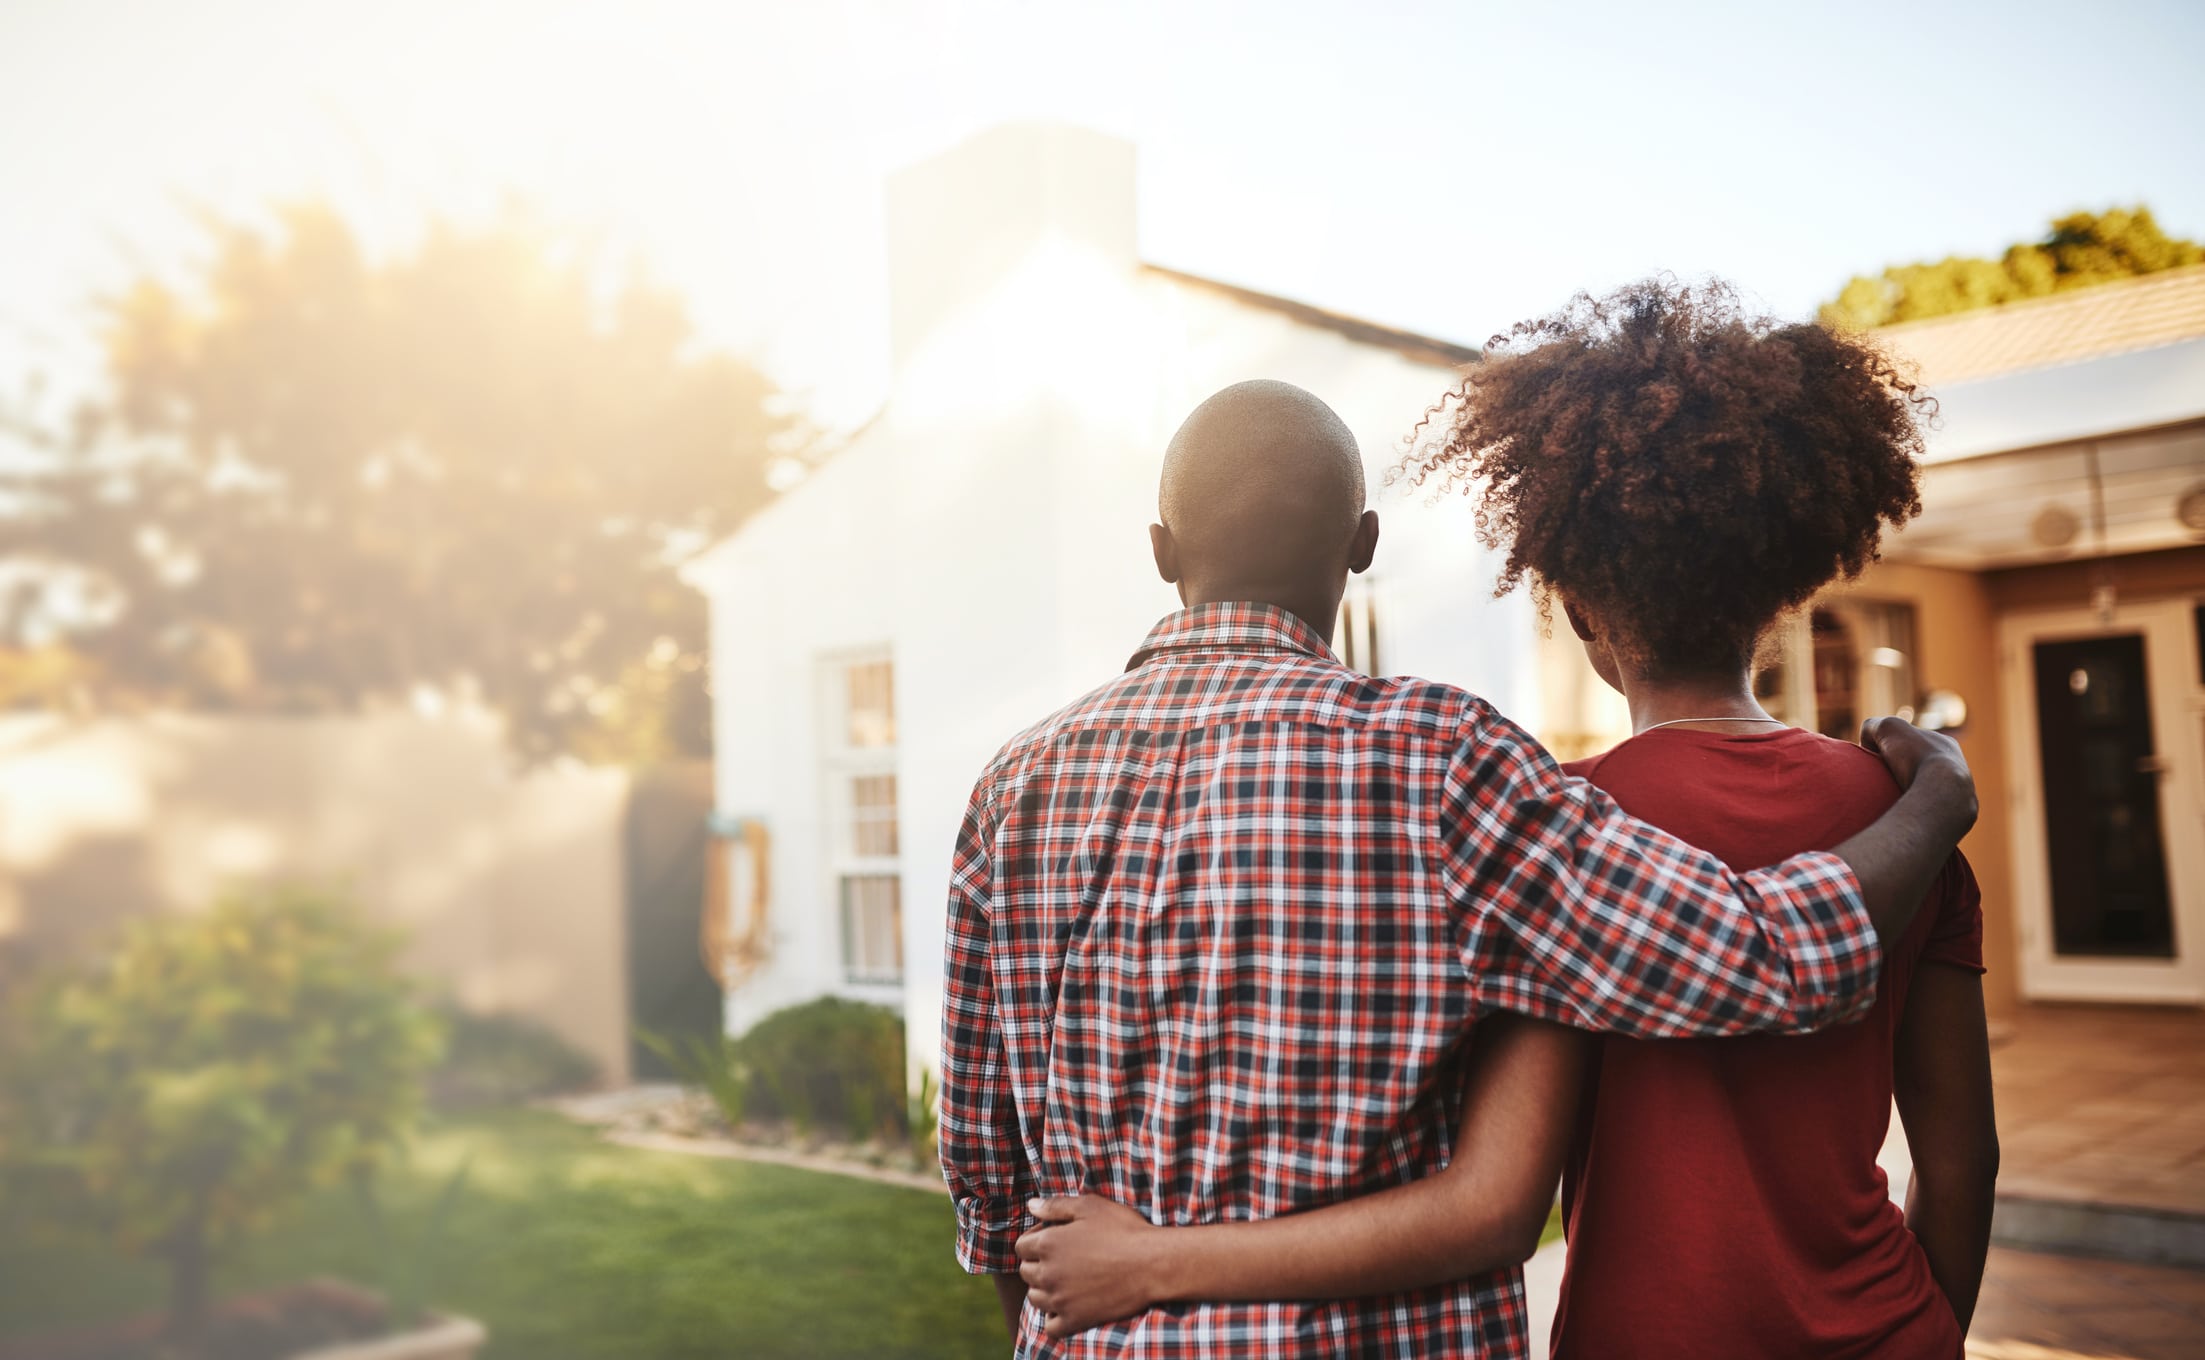 credit score to buy a home. Back view, black couple and hug outdoor at house, real estate and new loan for luxury home. Man, woman and people in front of property investment, moving and dream neighborhood for building mortgage